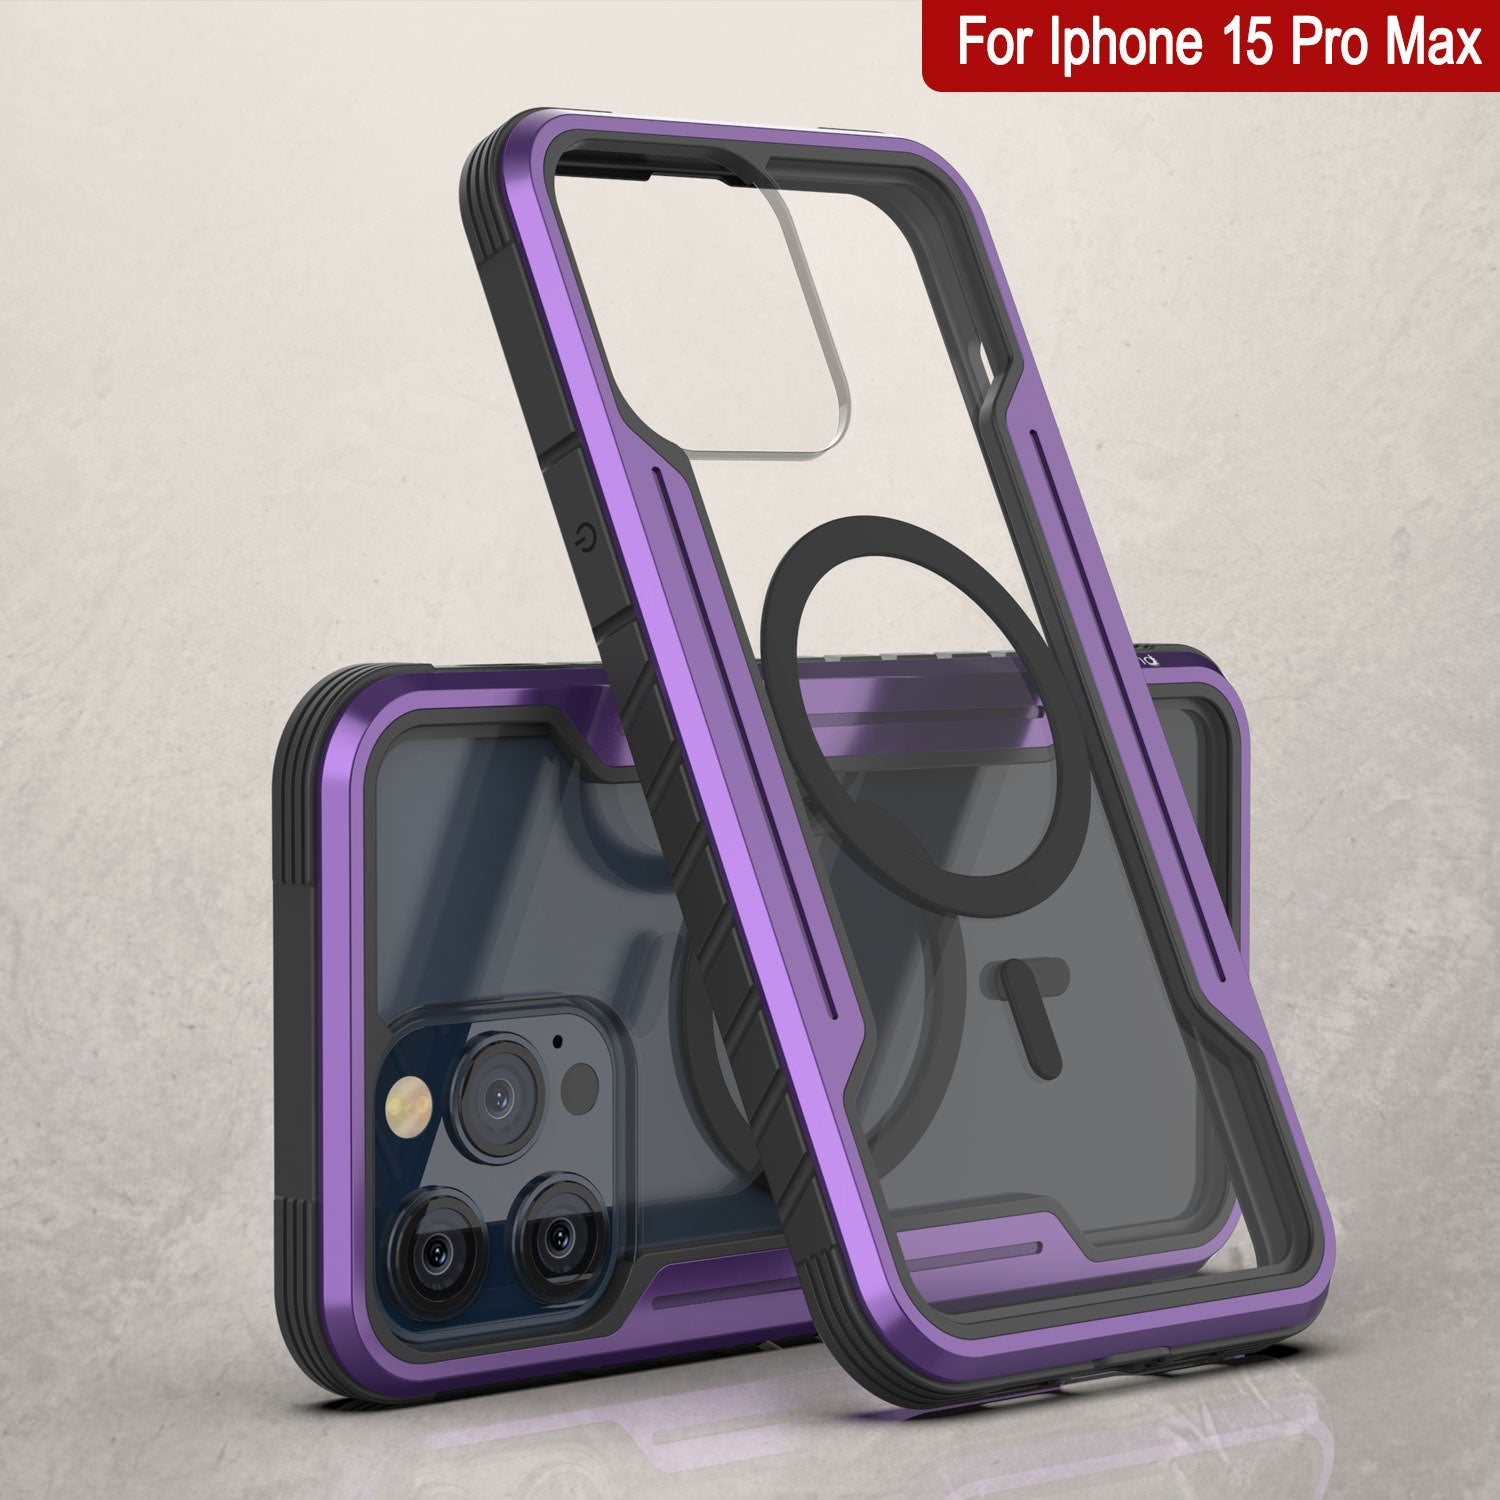 Punkcase iPhone 15 Pro Max Armor Stealth MAG Defense Case Protective Military Grade Multilayer Cover [Purple]